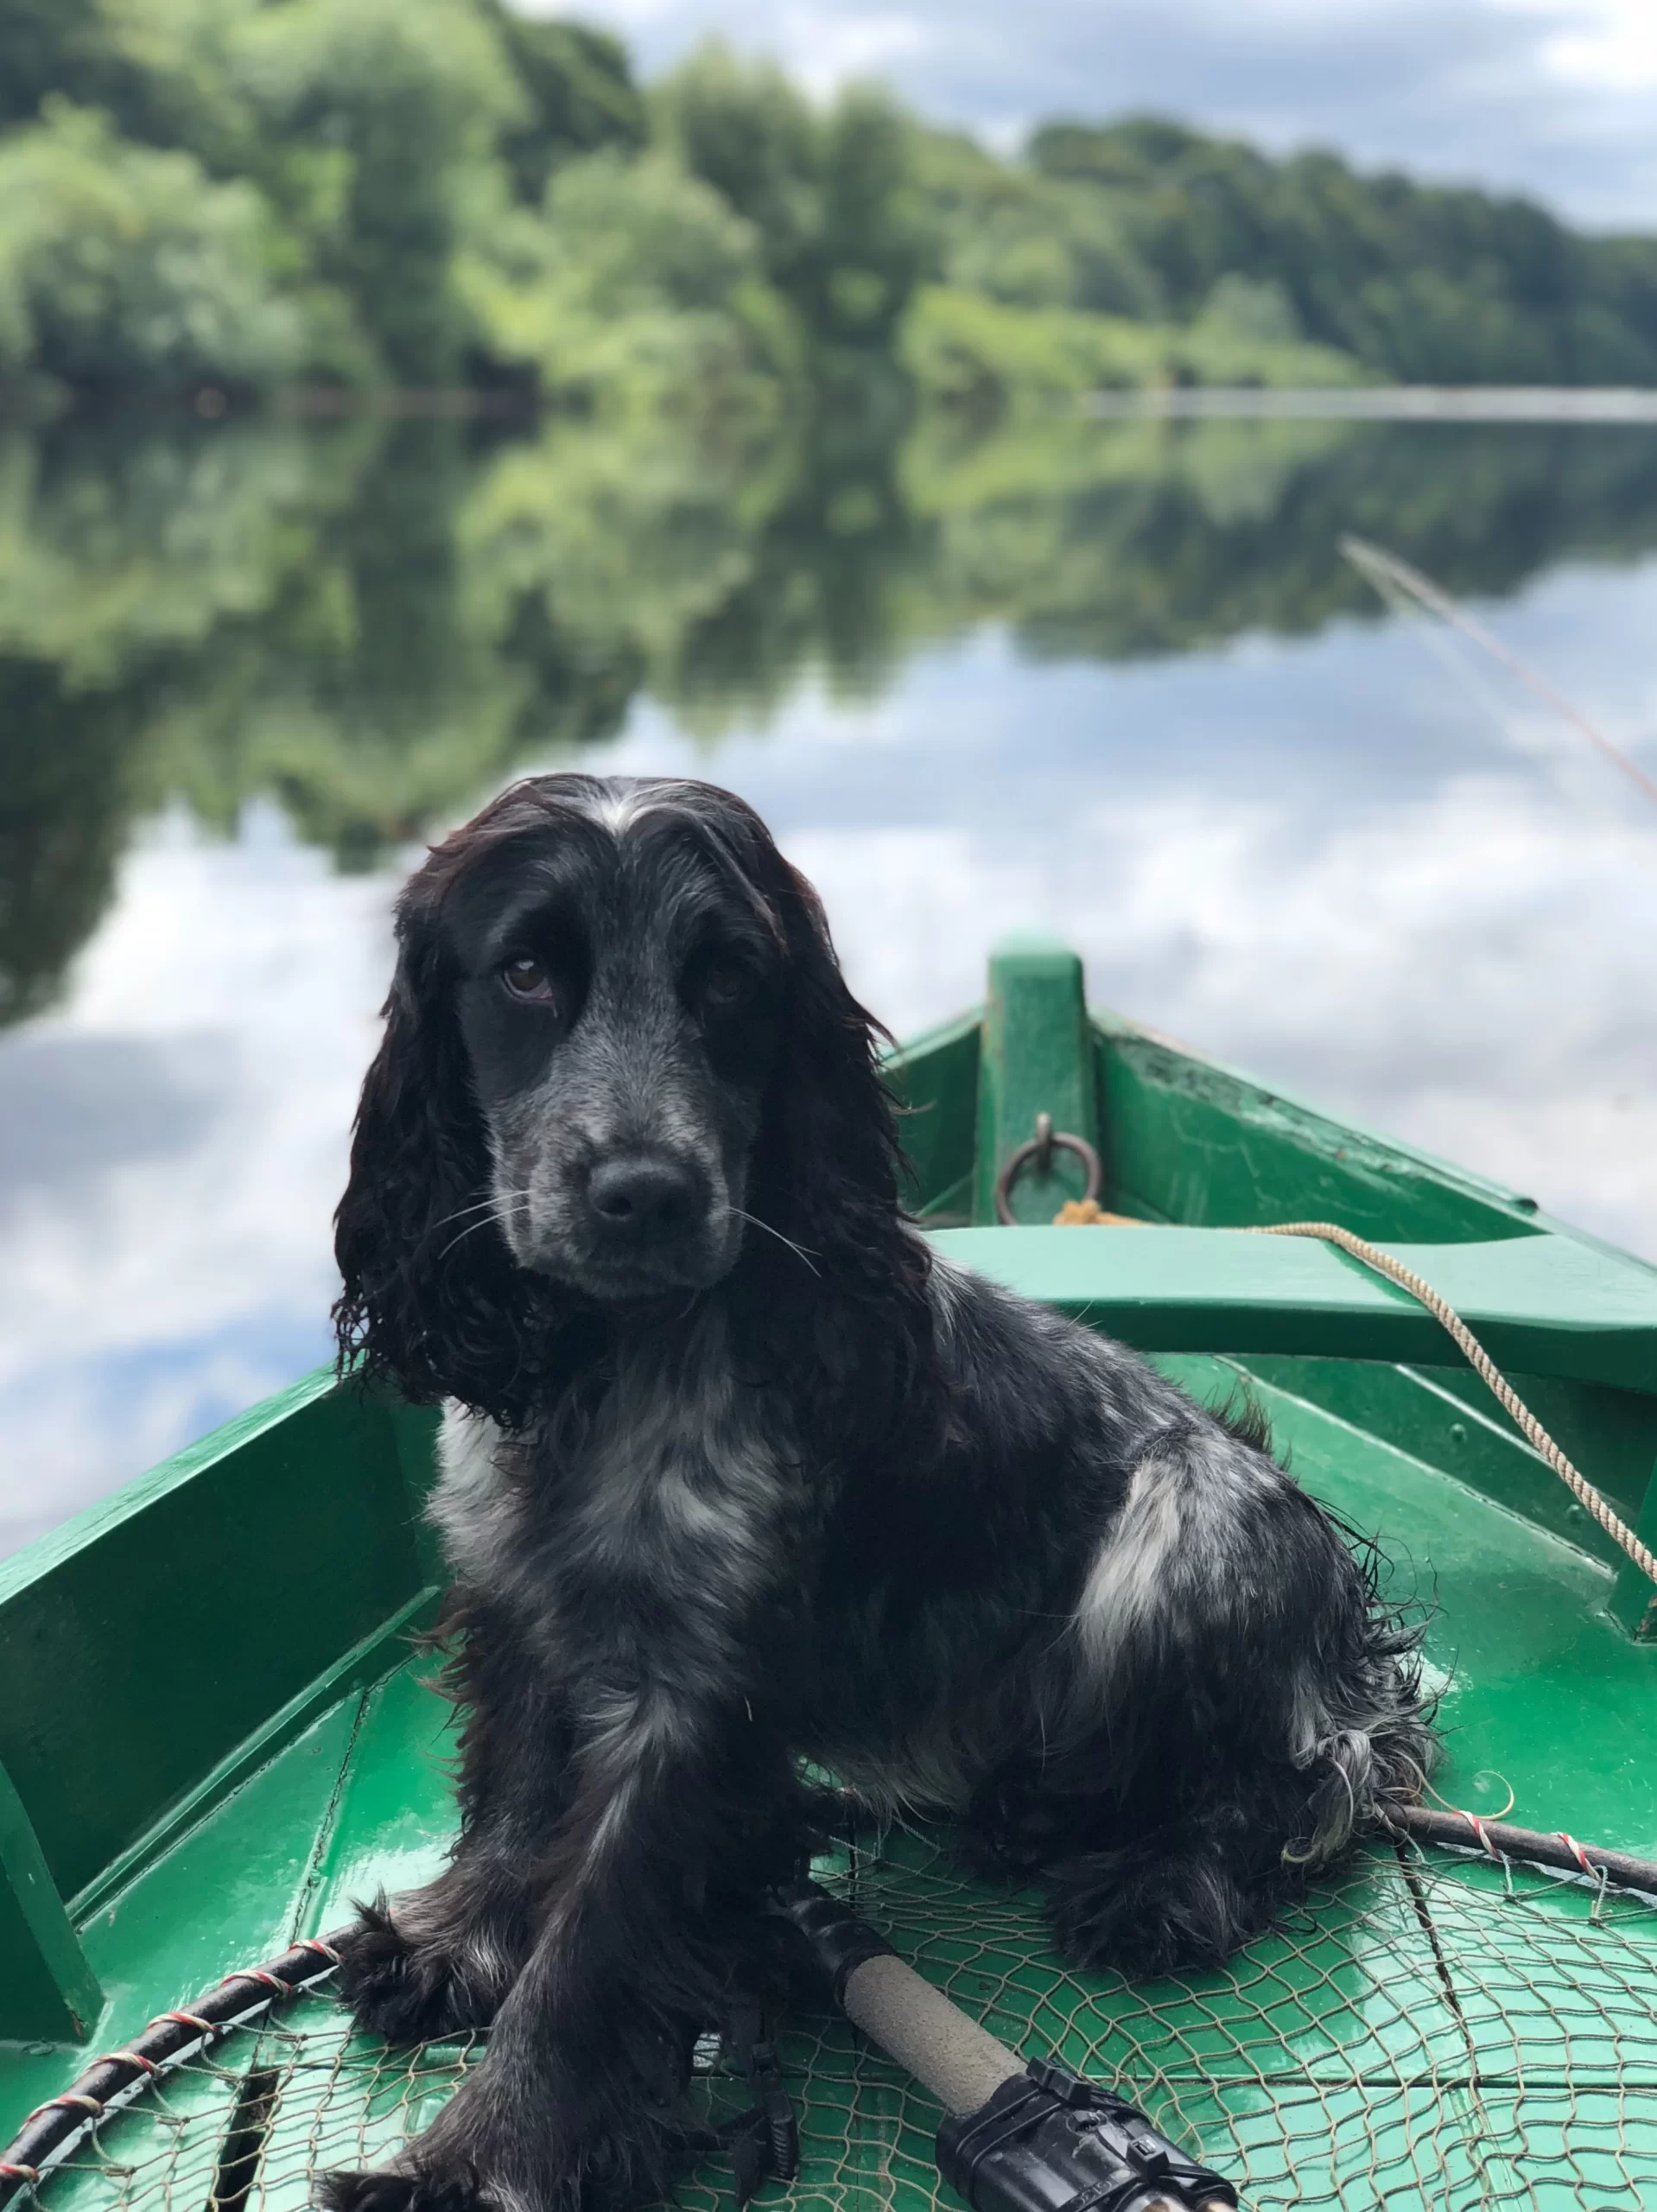 River Tweed, Coldstream TD12 4HE, UK, Scottish Borders, United Kingdom
Published on July 26, 2018
Apple, iPhone X
Free to use under the Unsplash License
Fly fishing on the Tweed for salmon, unsuccessfully. The dog was less than impressed by my casting....